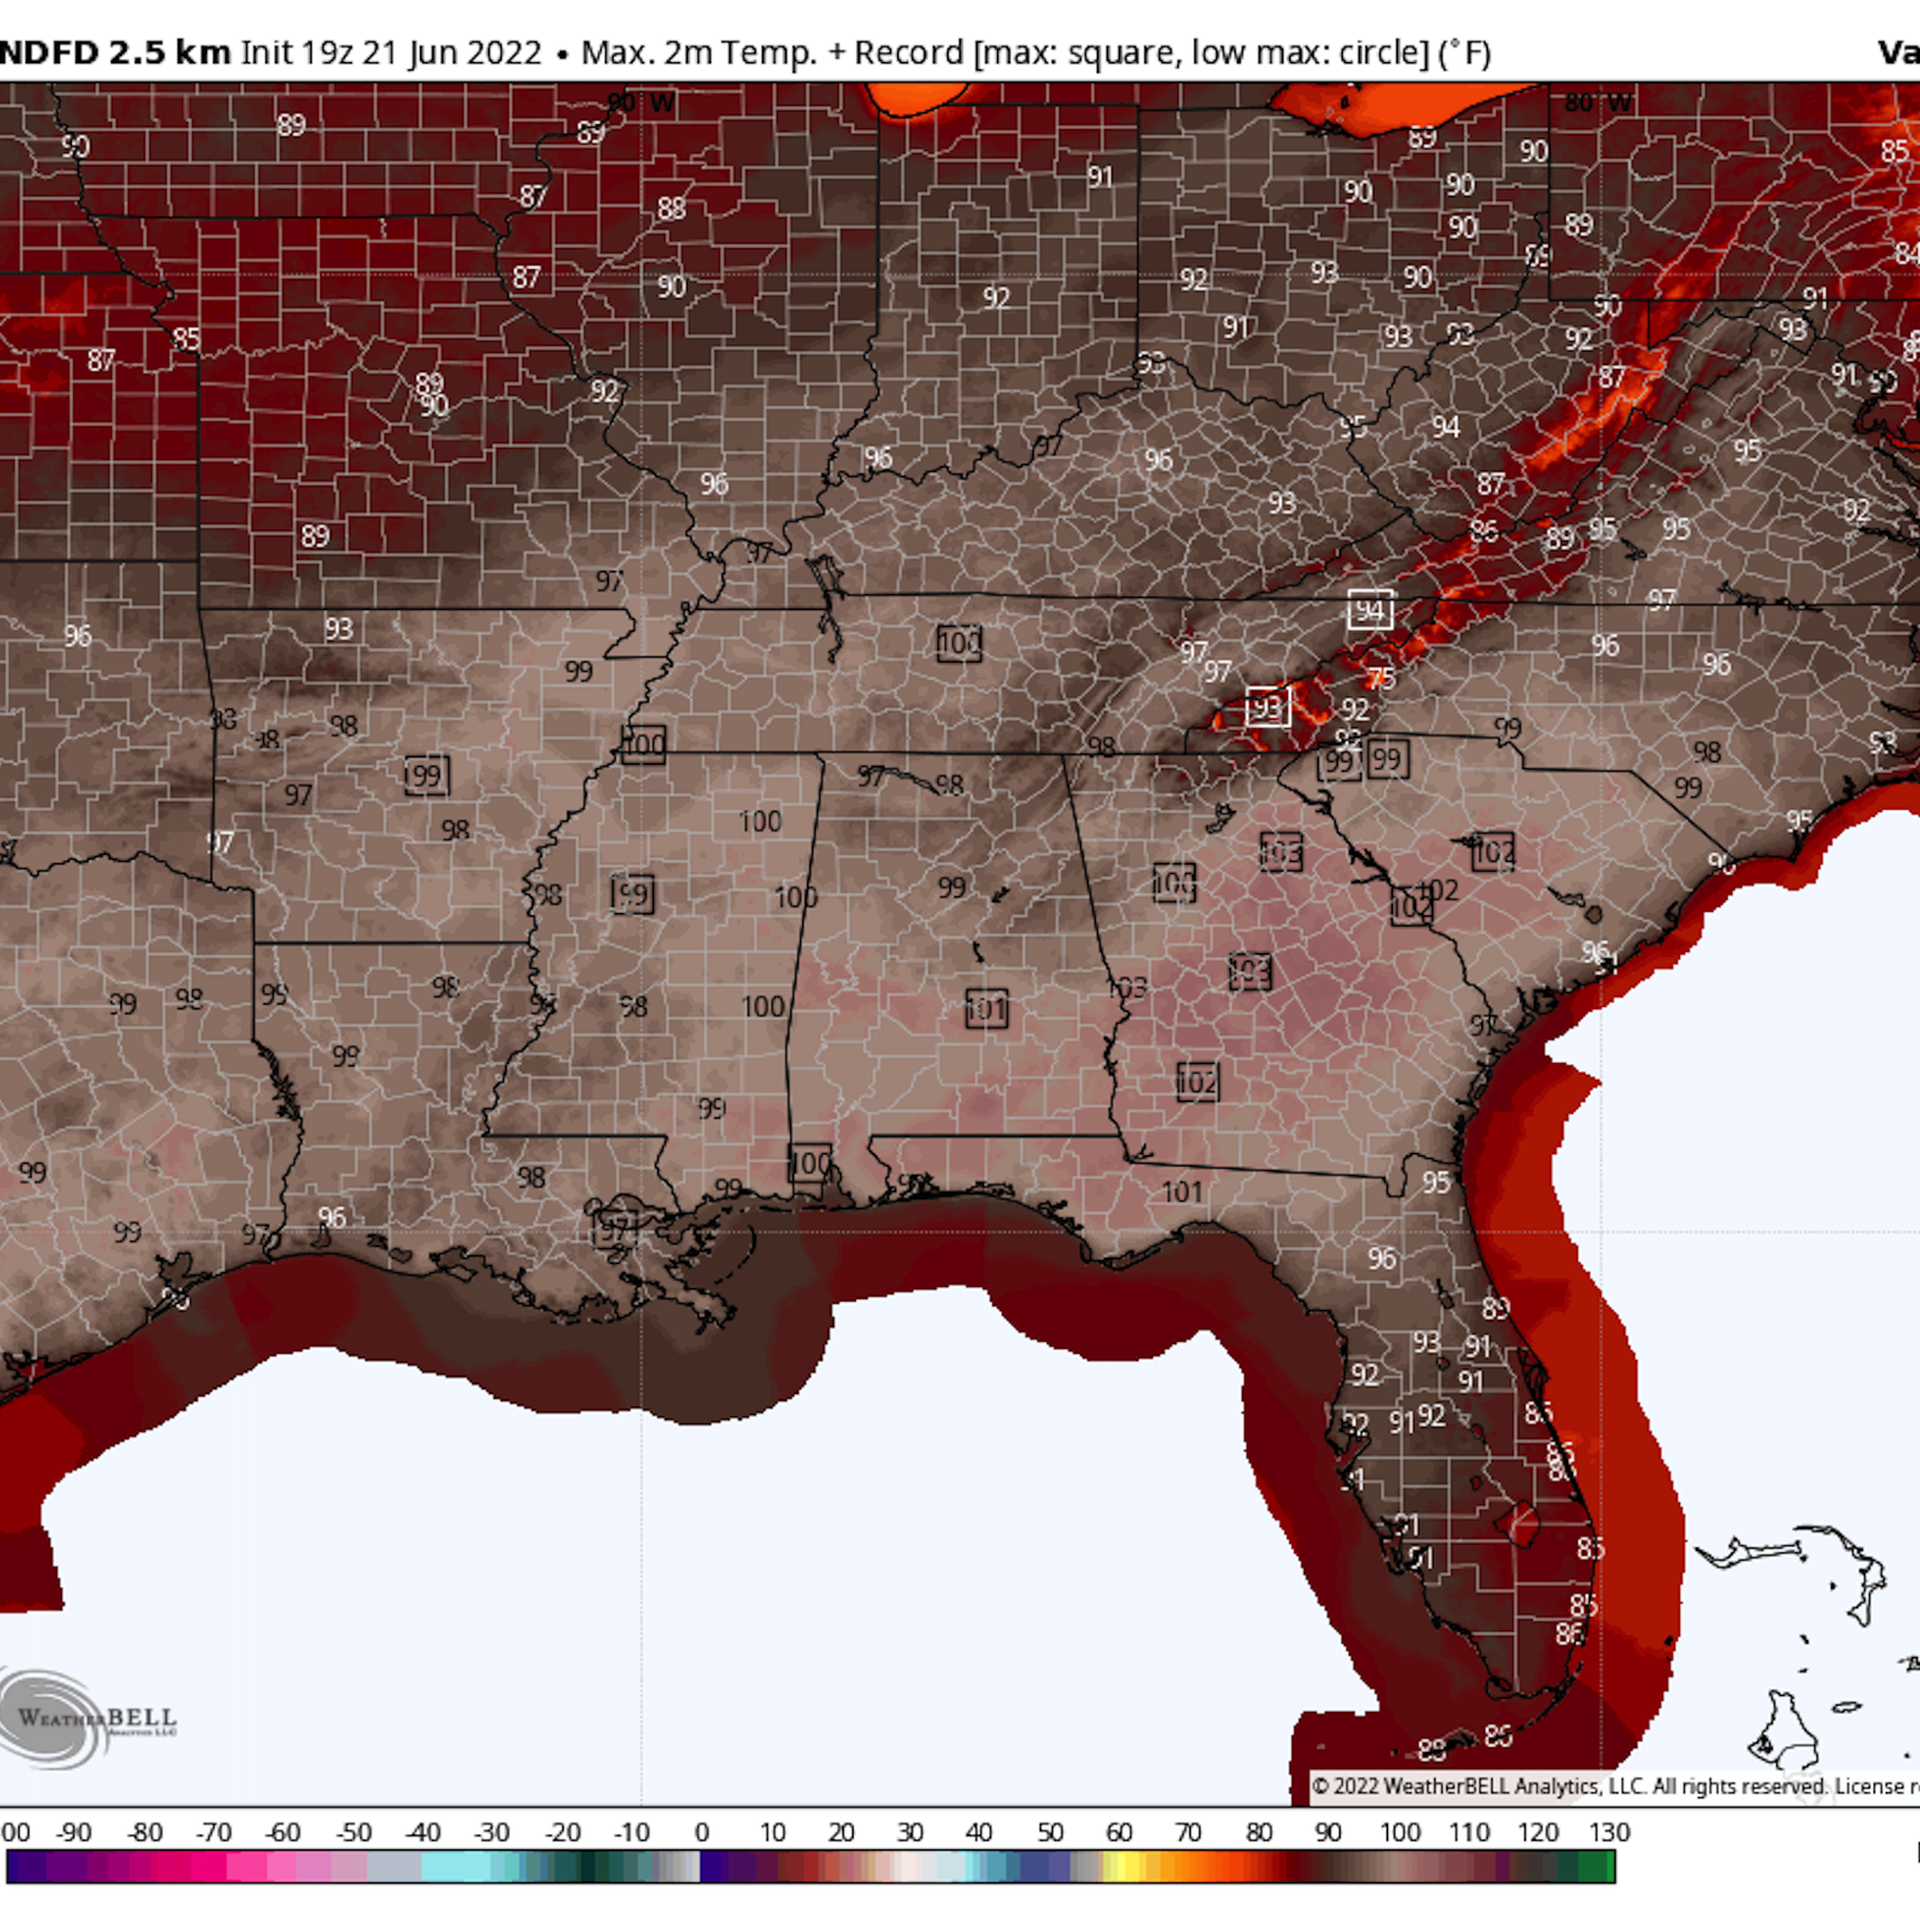 Forecast high temperatures for Wednesday, June 22, 2022.